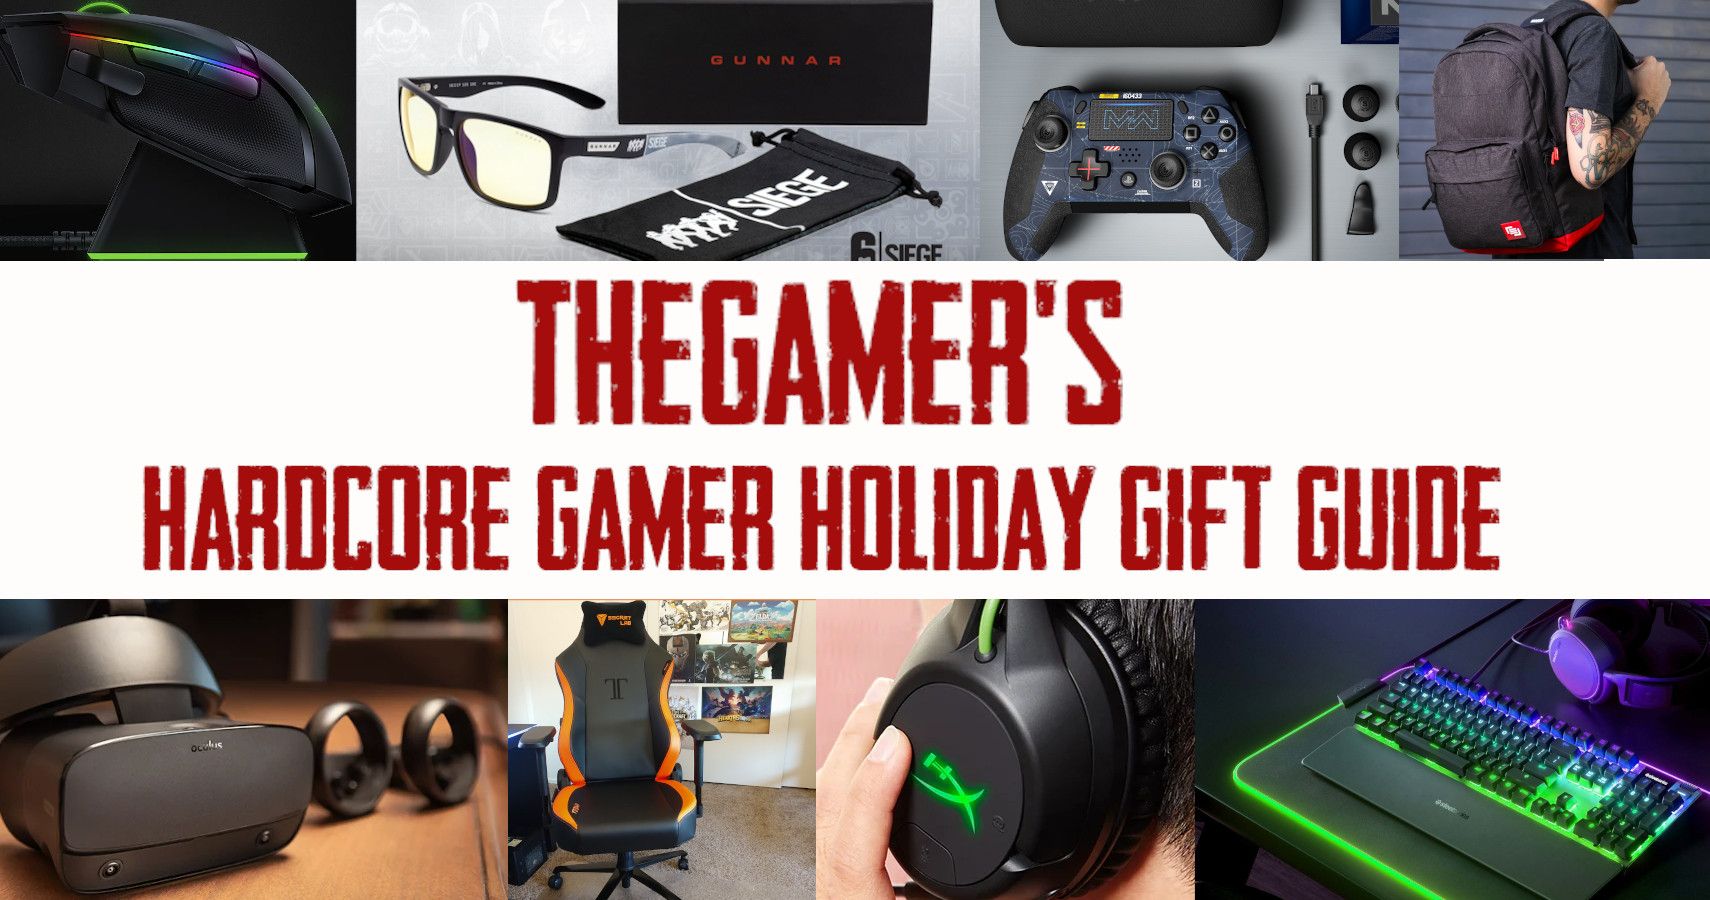 TheGamers Hardcore Gamer Holiday Gift Guide